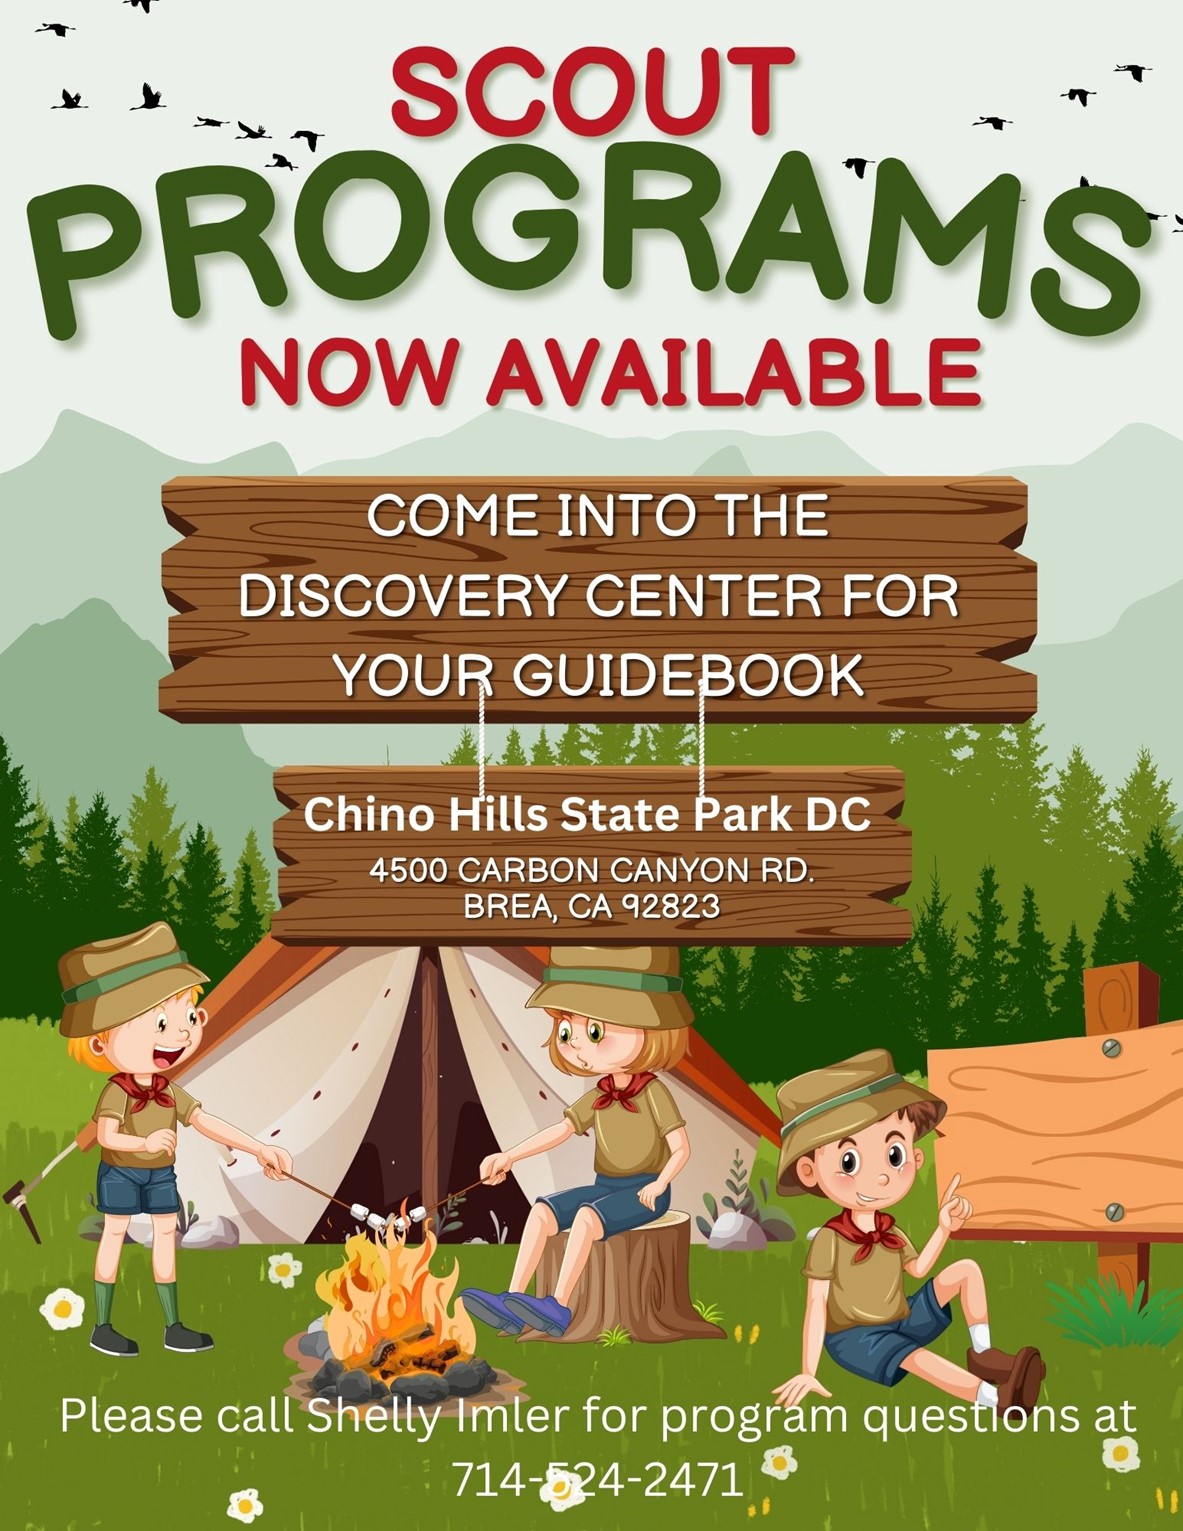 DC scouting flyer - visit the discovery center to pick up a scouting guidebook